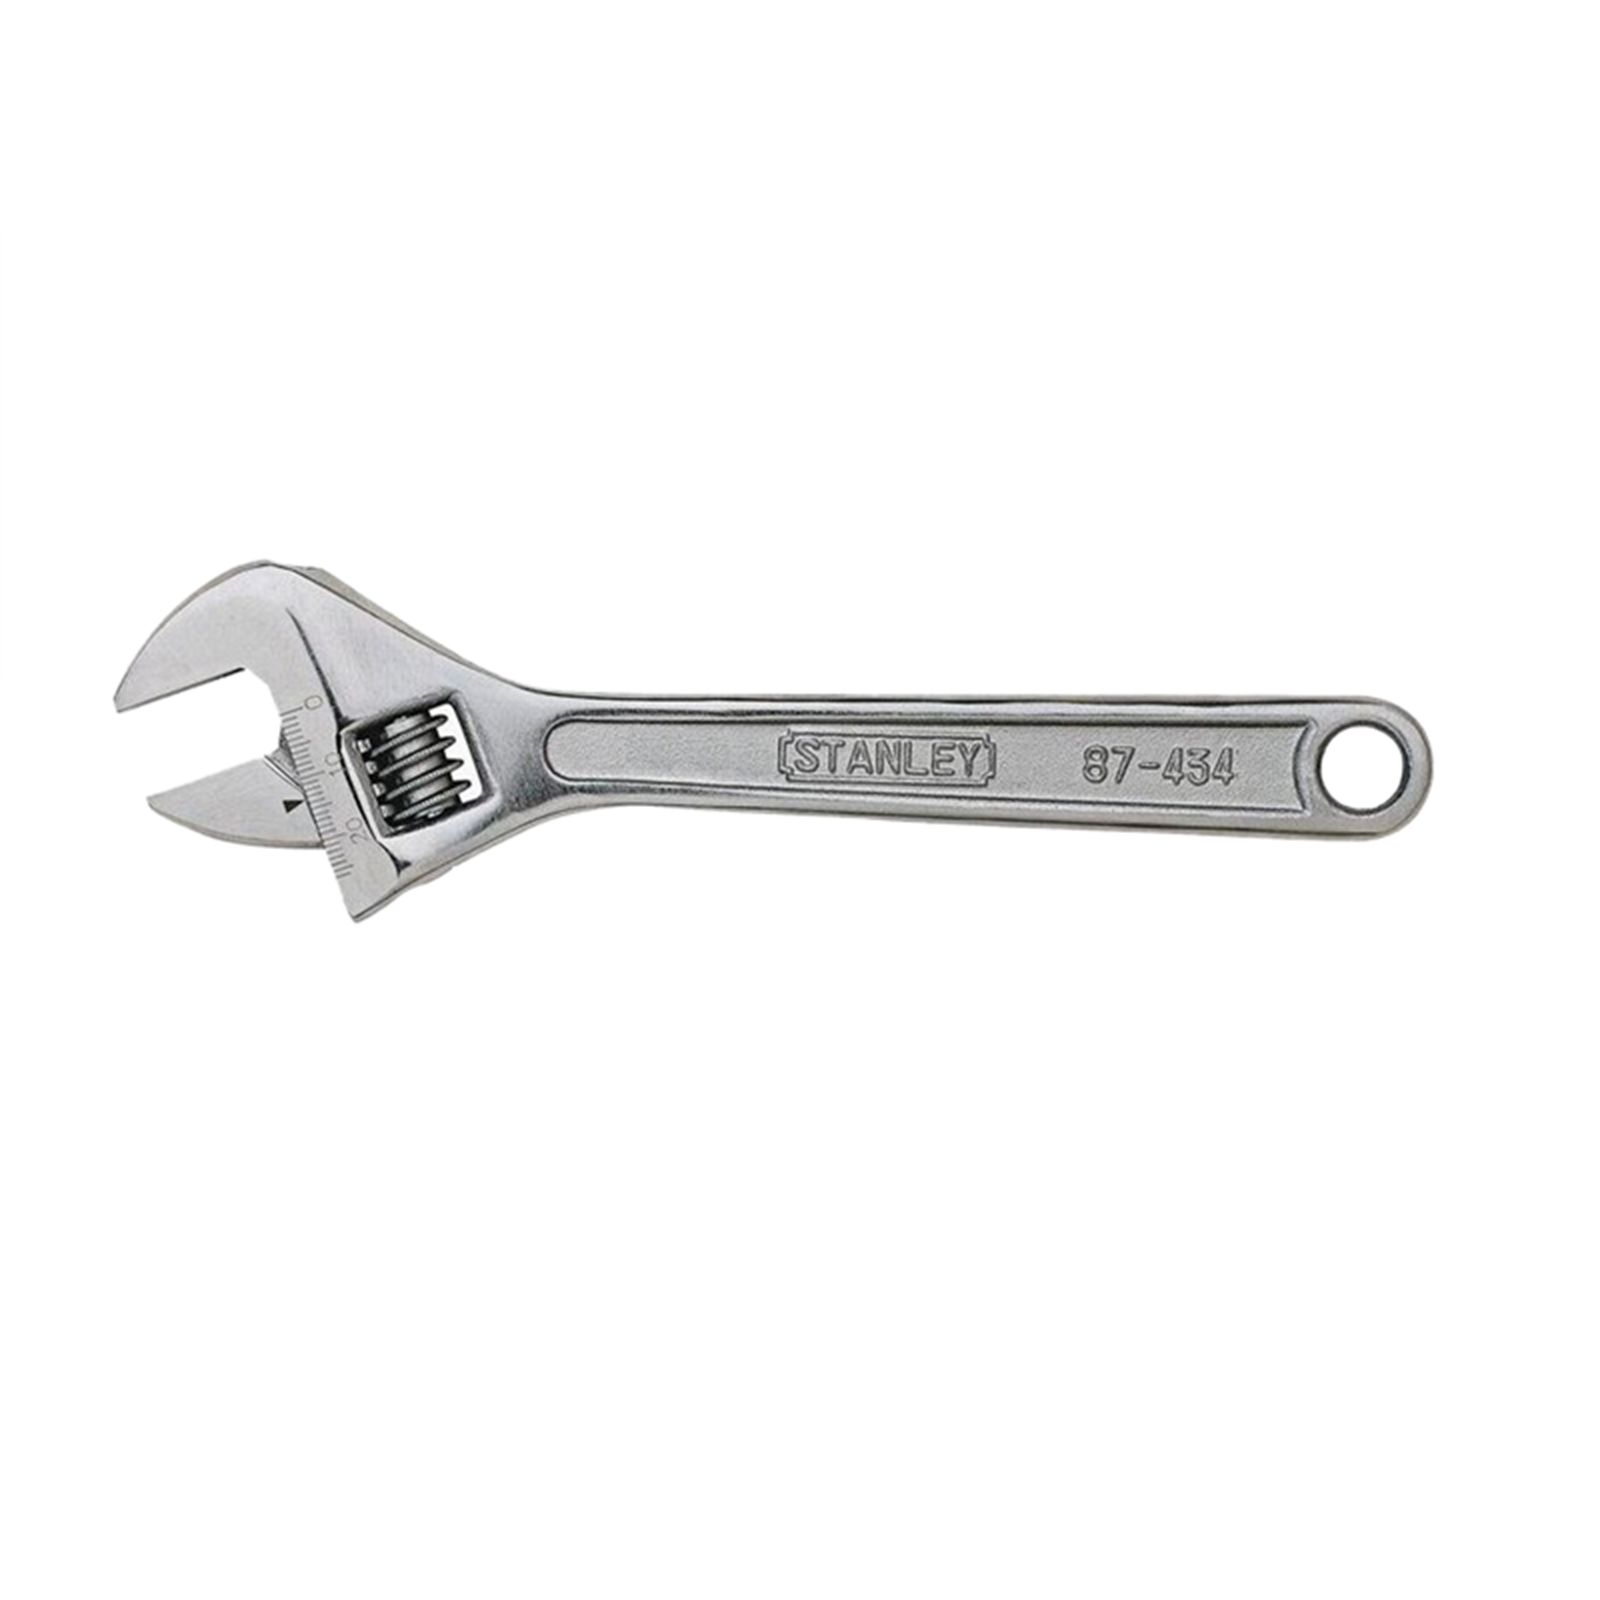 Stanley 300mm Adjustable Wrench